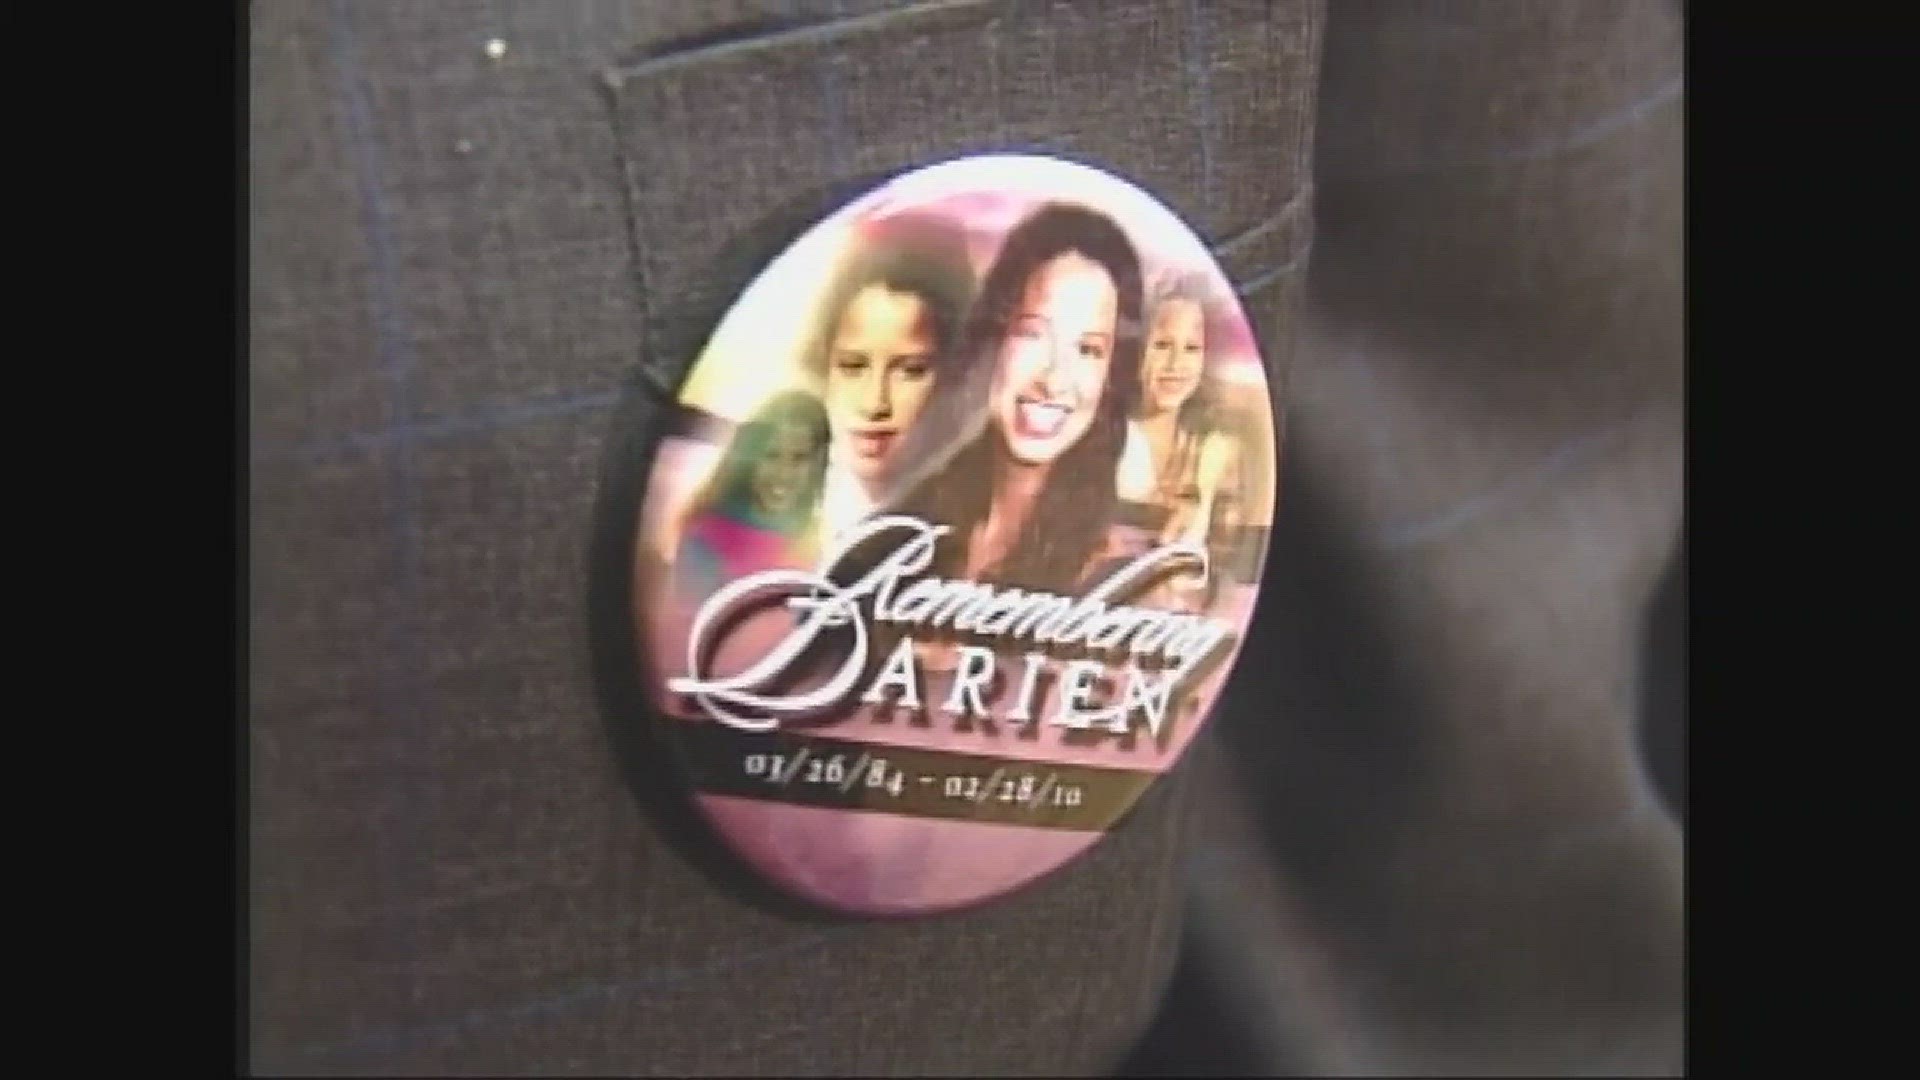 Darien Richardson was shot in January 2010. She died as a result of her injuries in late February.